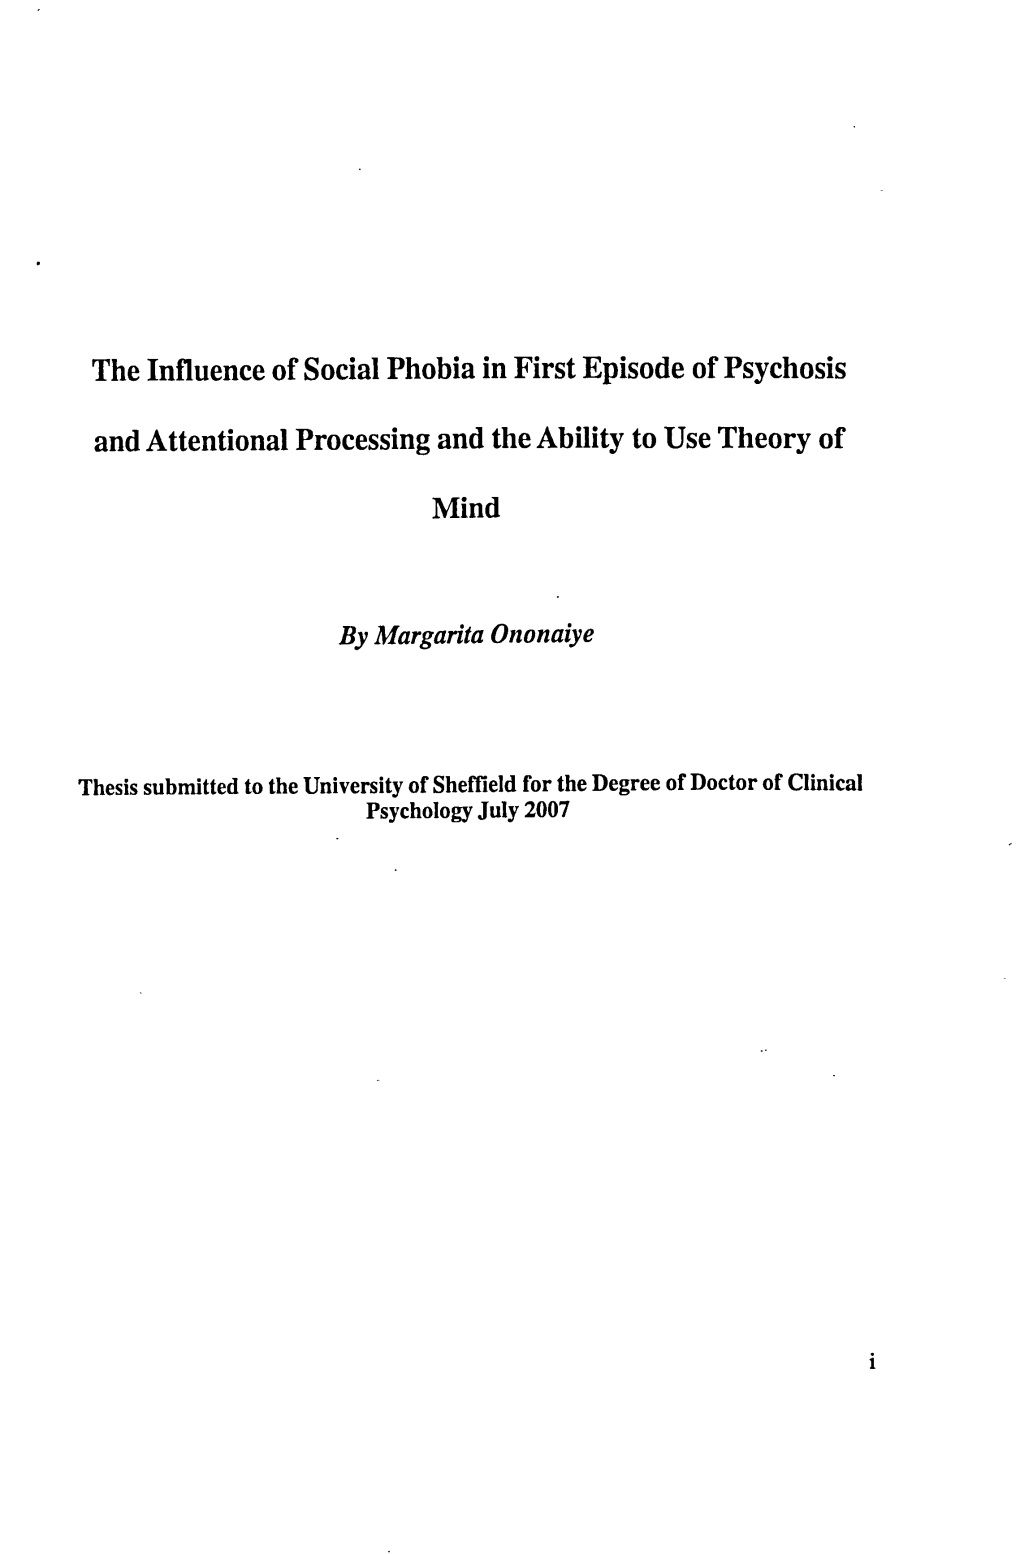 The Influence of Social Phobia in First Episode of Psychosis And